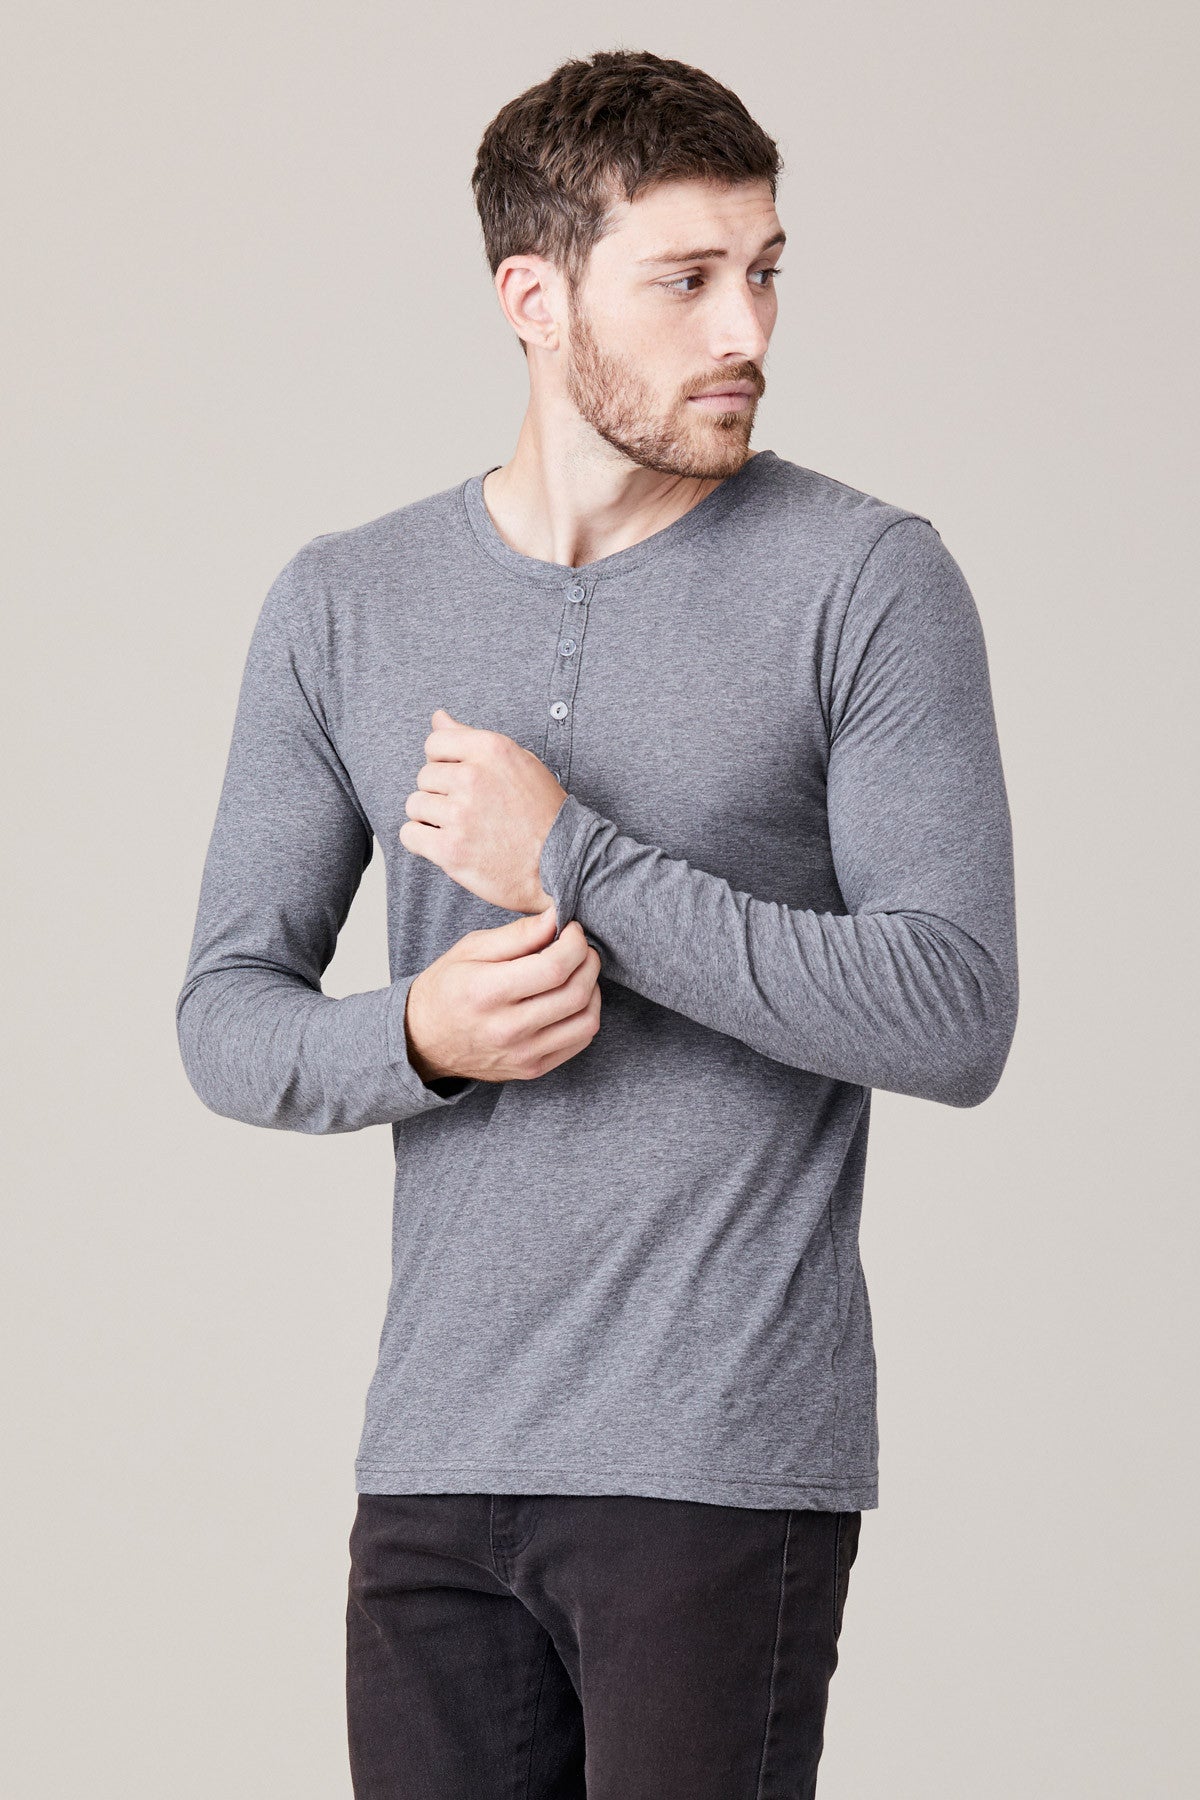 Men's Men's Long Sleeve Button Henley - Heather Grey, S by LNA Clothing